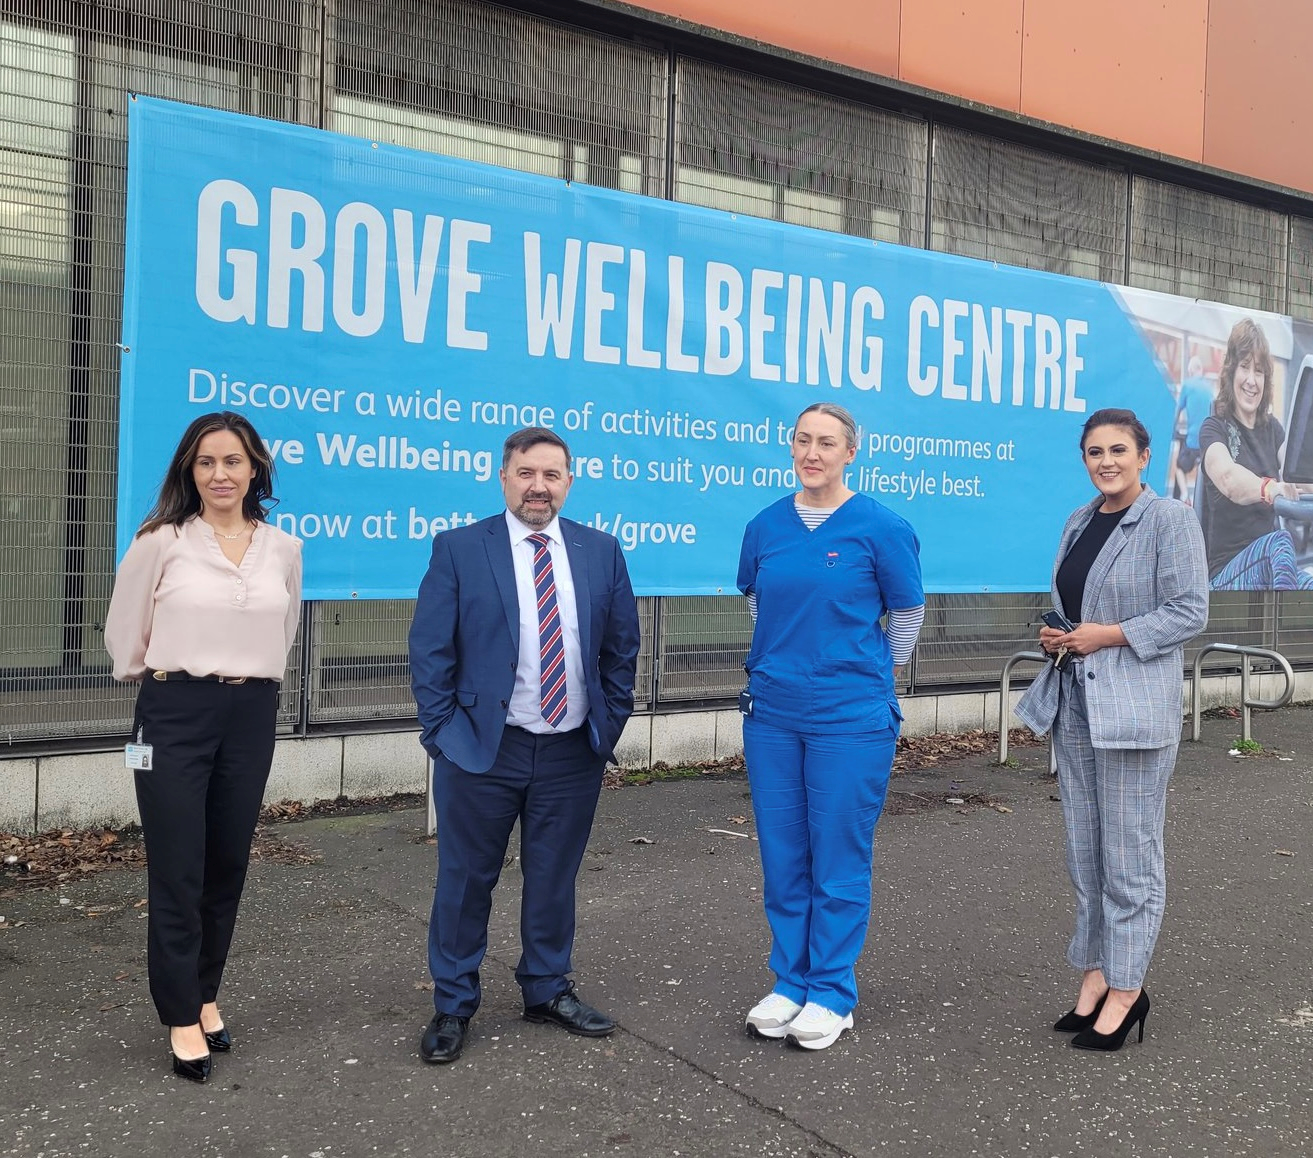  Robin Swann pays a visit to Grove Medical Practice